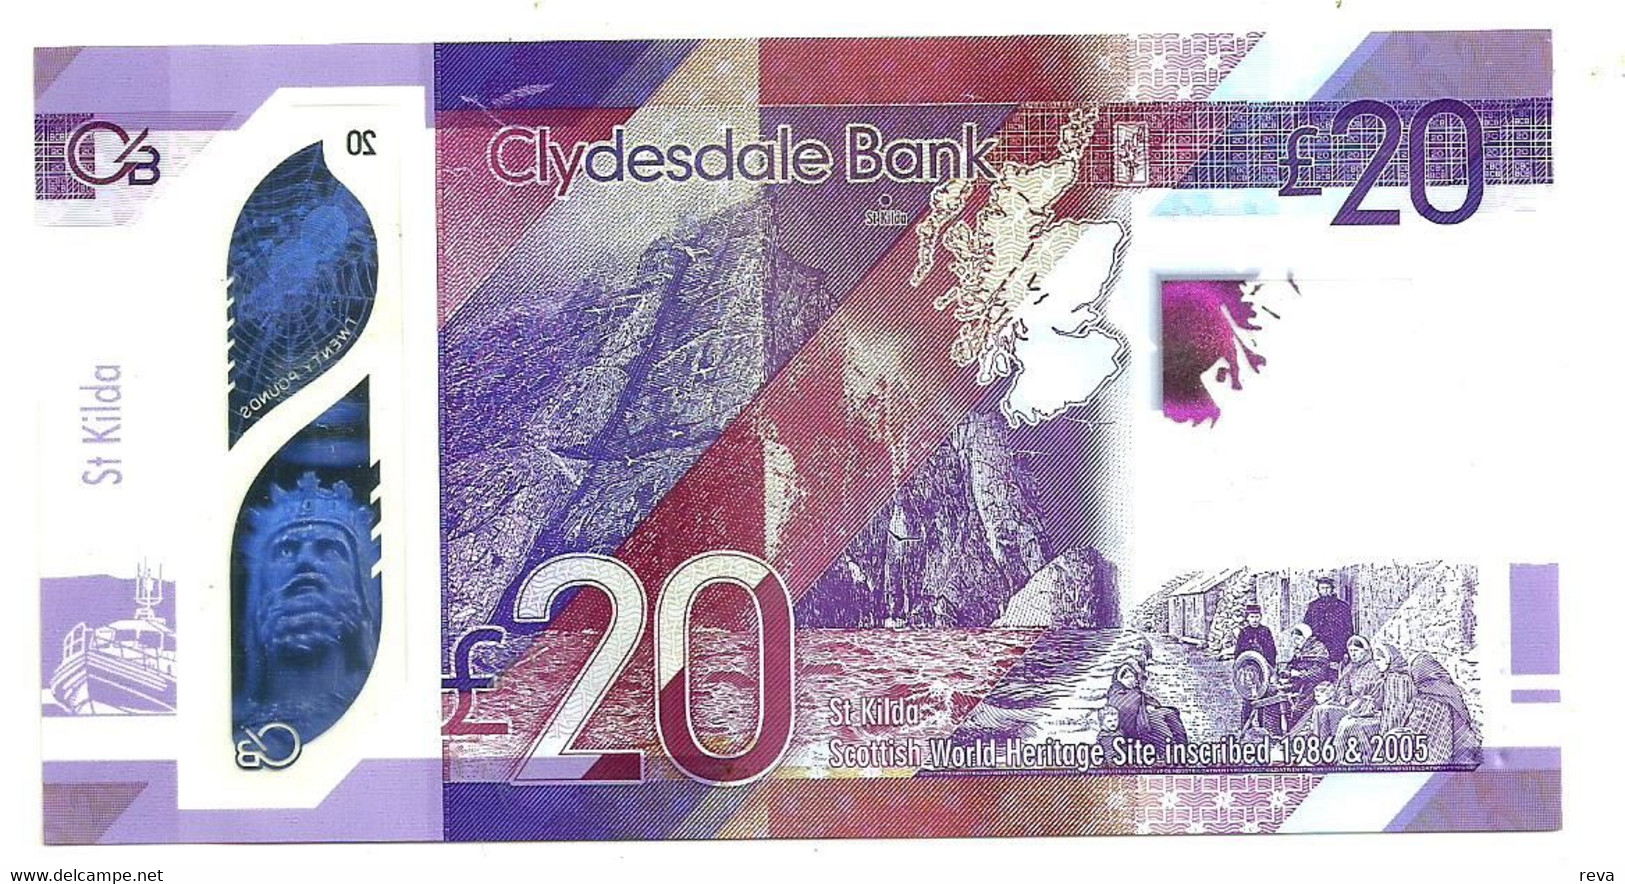 UNITED KINGDOM SCOTLAND CLYDEBANK 20 POUNDS MAN FRONT WOMAN ESBACK DATED 11-07-2019 UNC PNew POLYMER READ DESCRIPTION !! - 20 Pounds